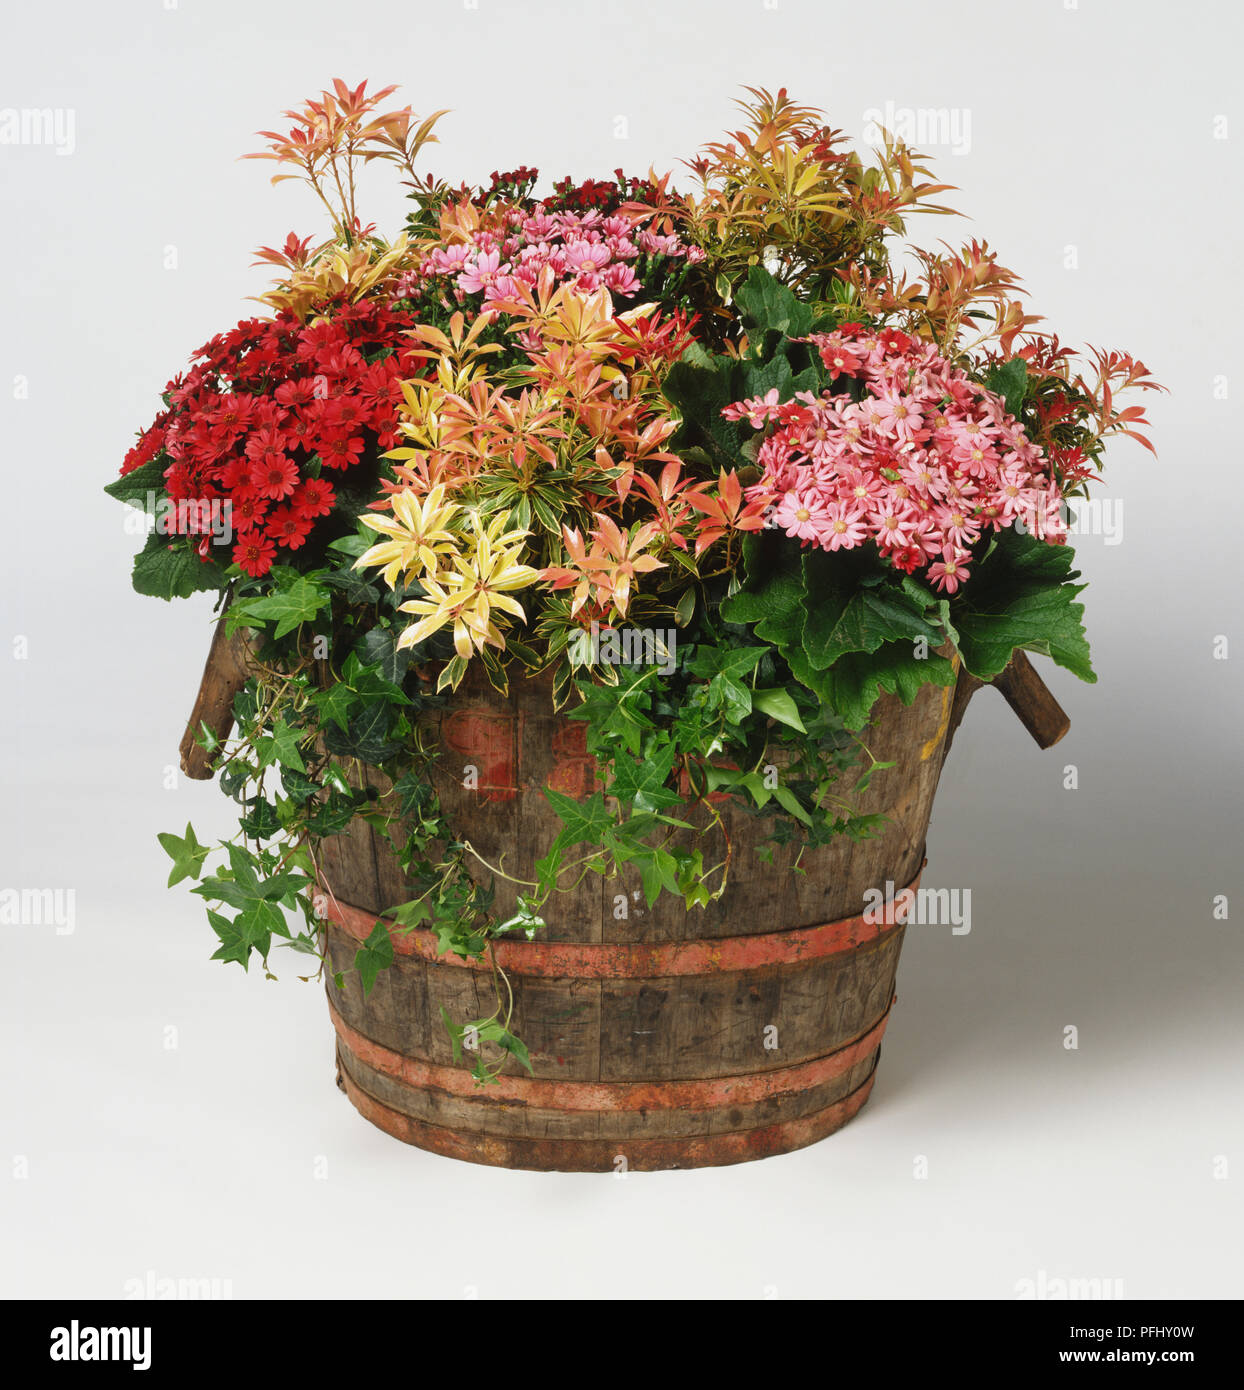 Assorted plants and flowers growing in wooden barrel, front view. Stock Photo